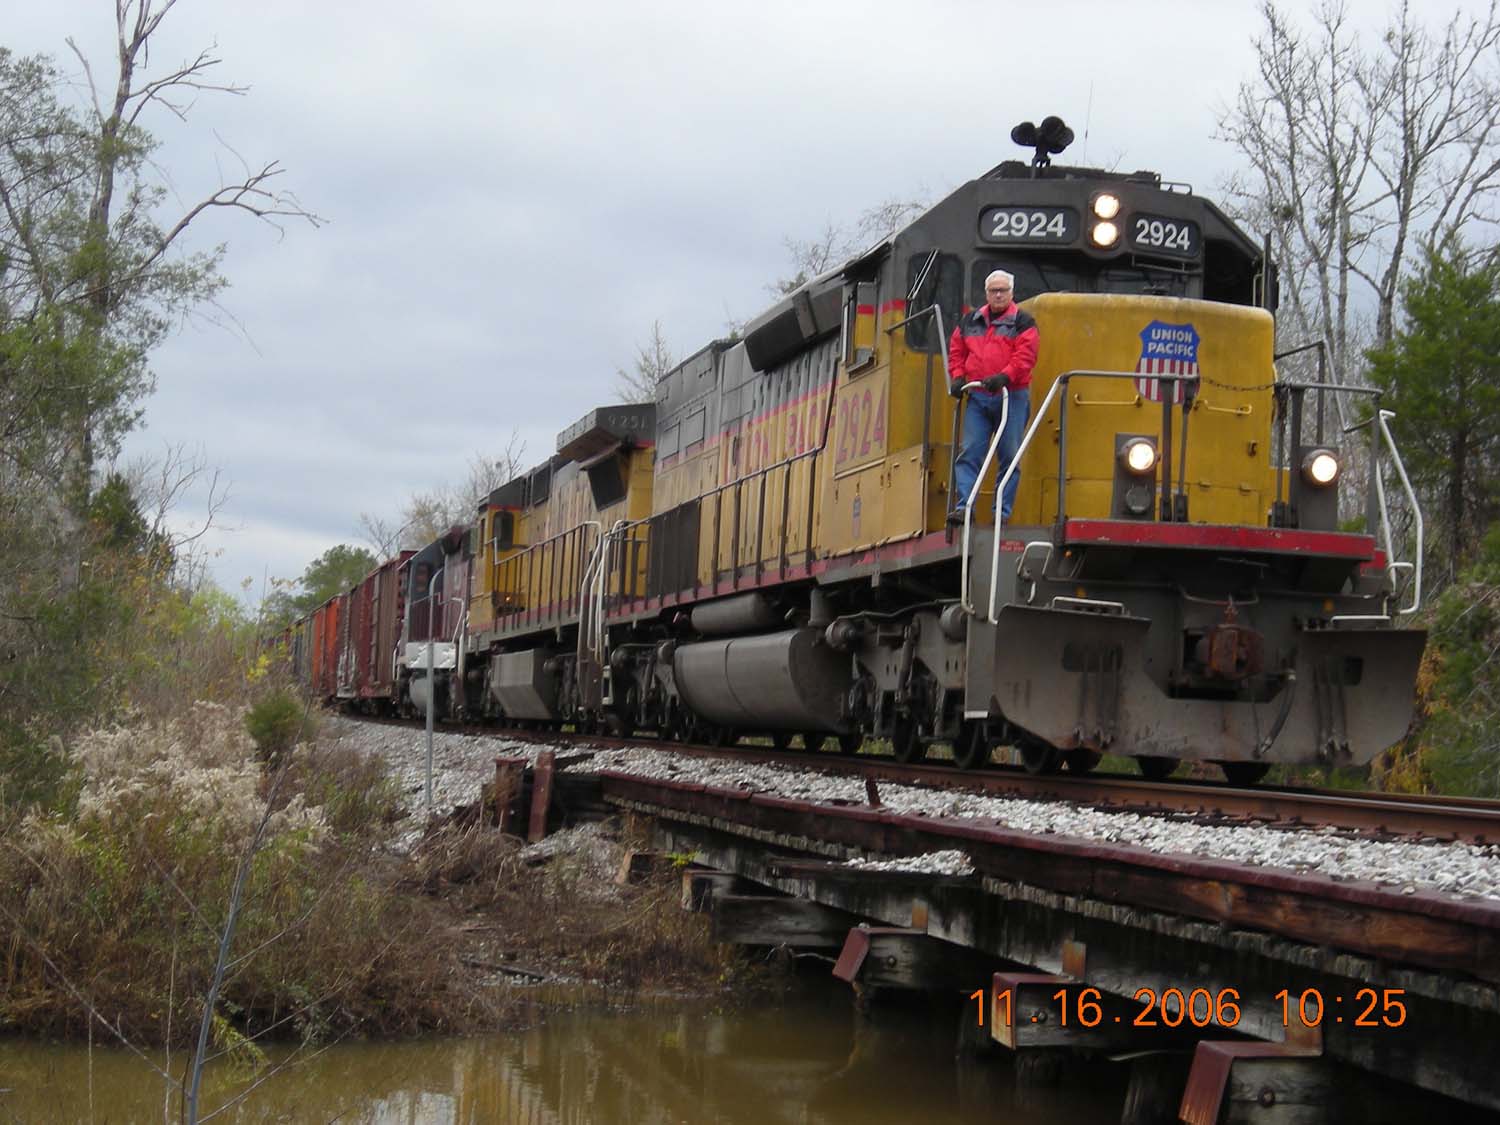 A lowland bayou in west Alabama provides a scenic foreground for an ex-D&RGW SD40-2 